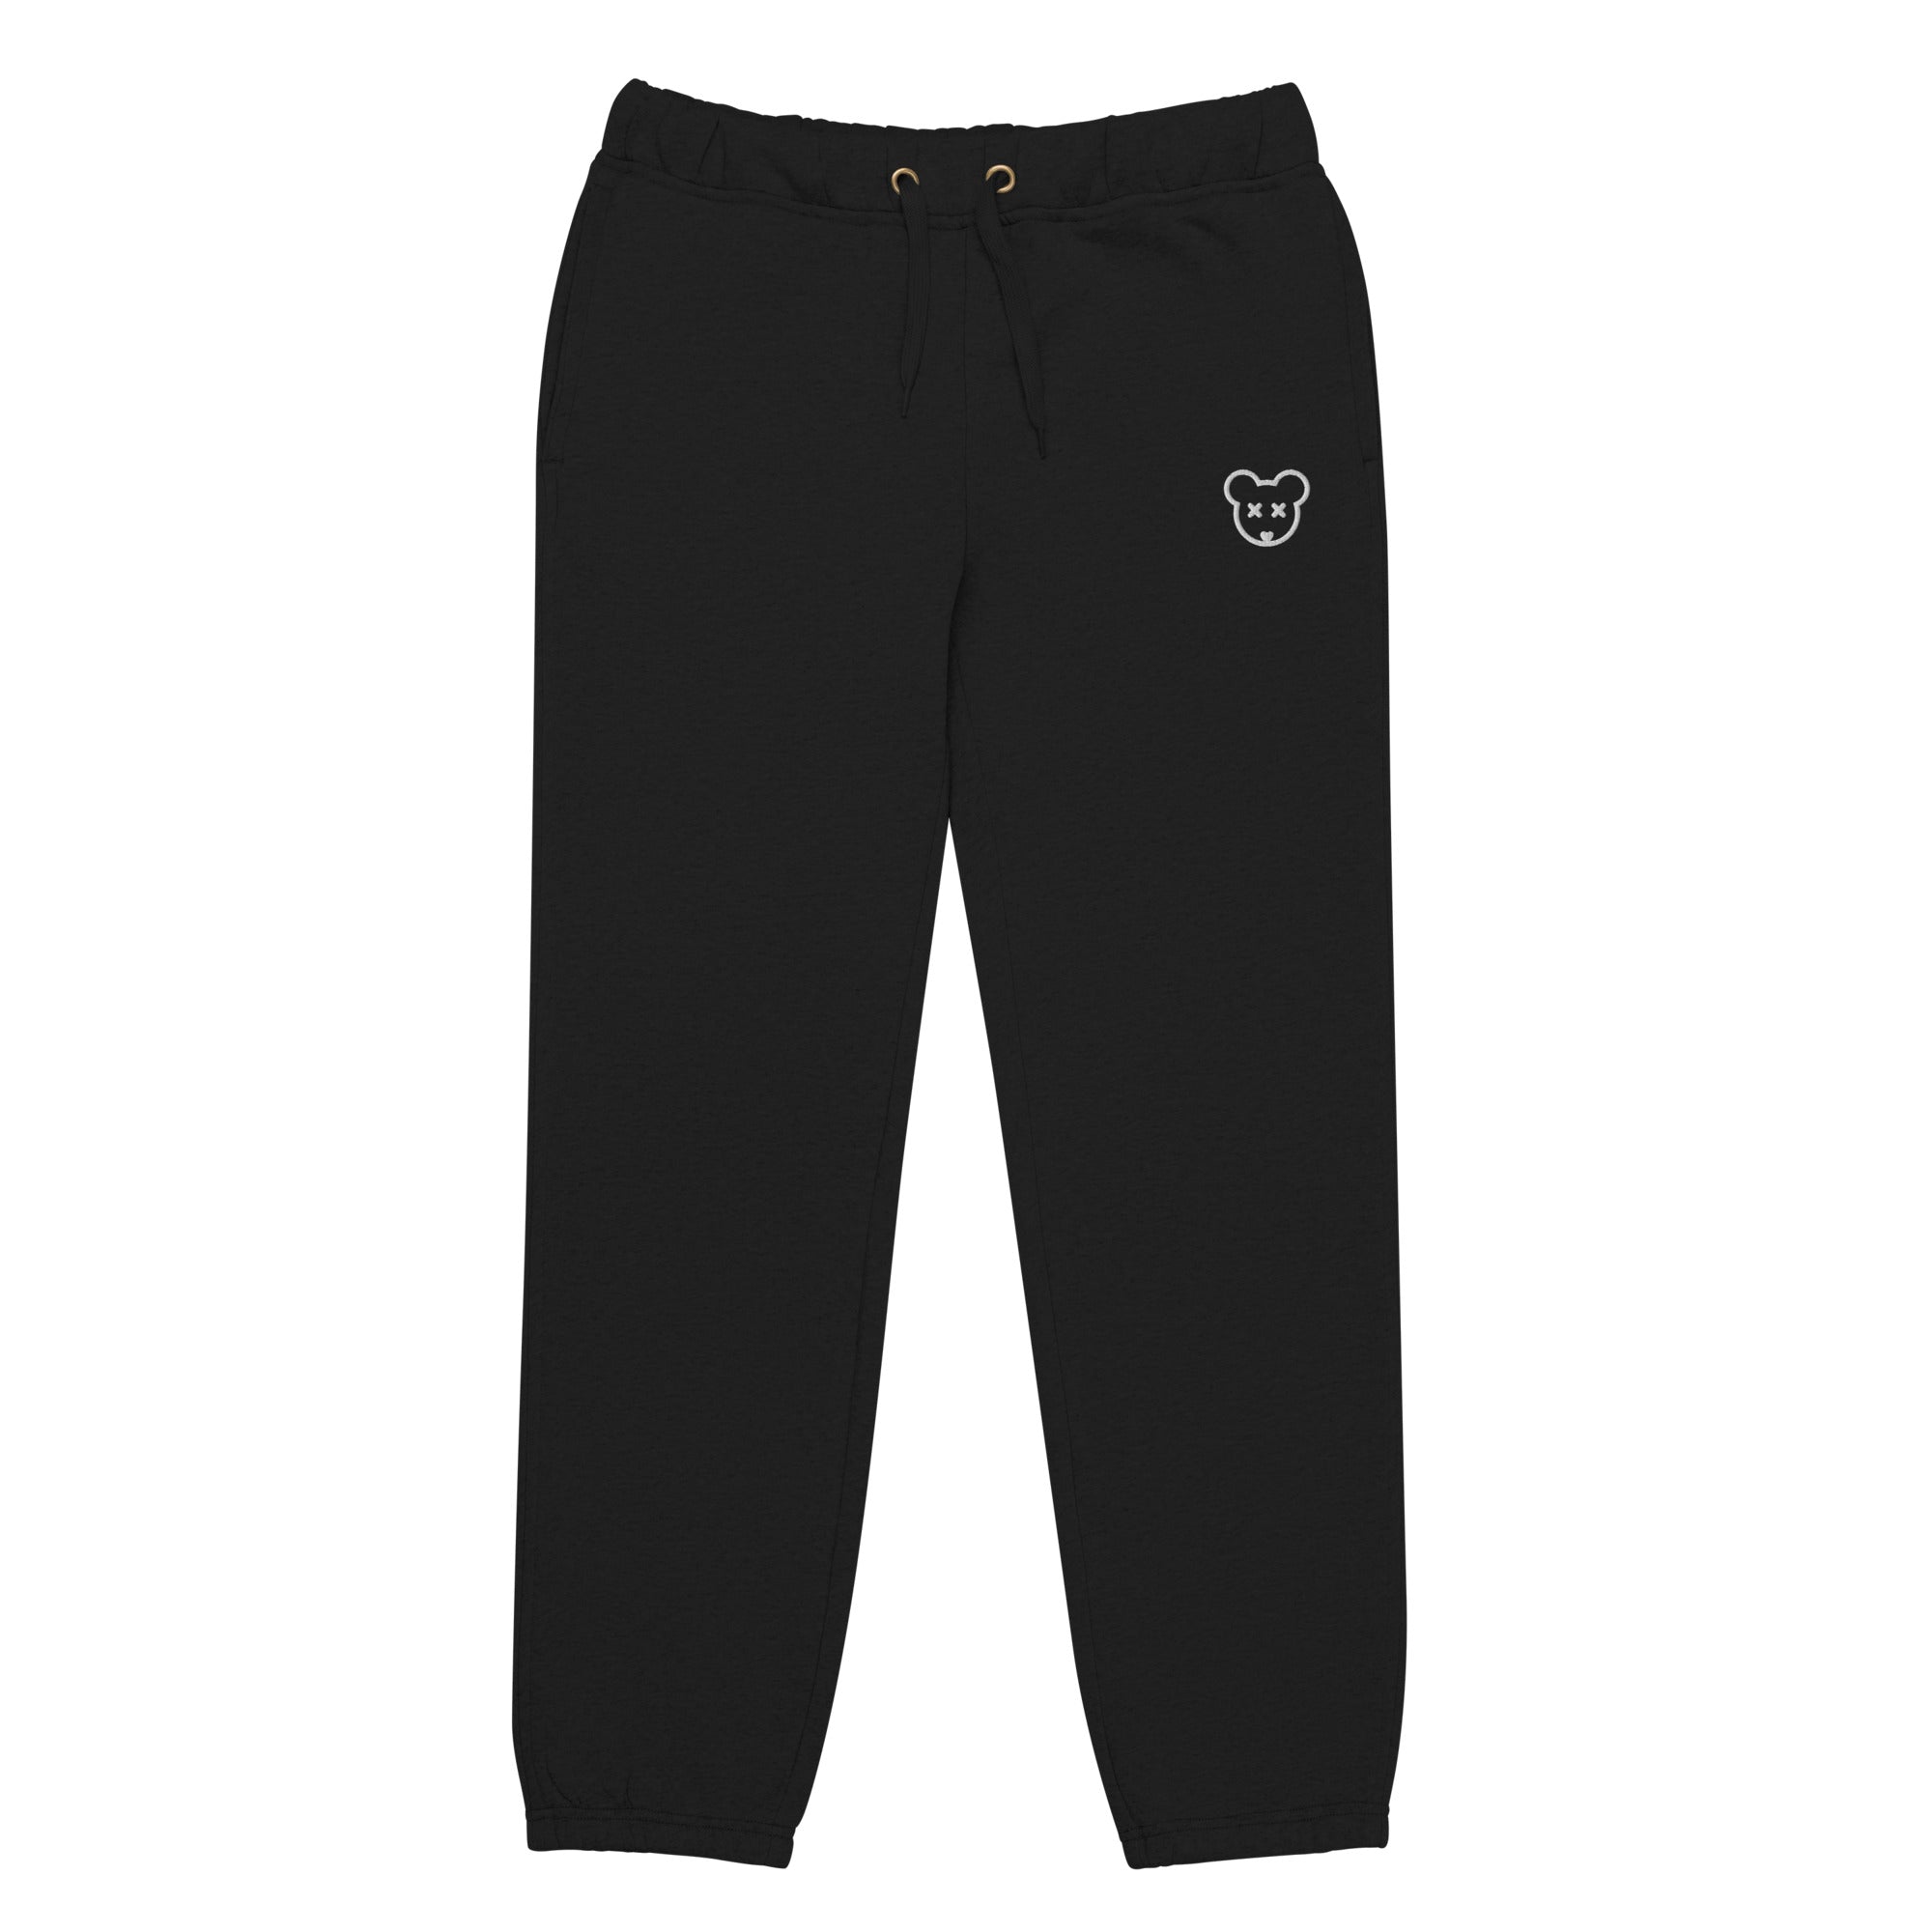 Unisex loose fit joggers